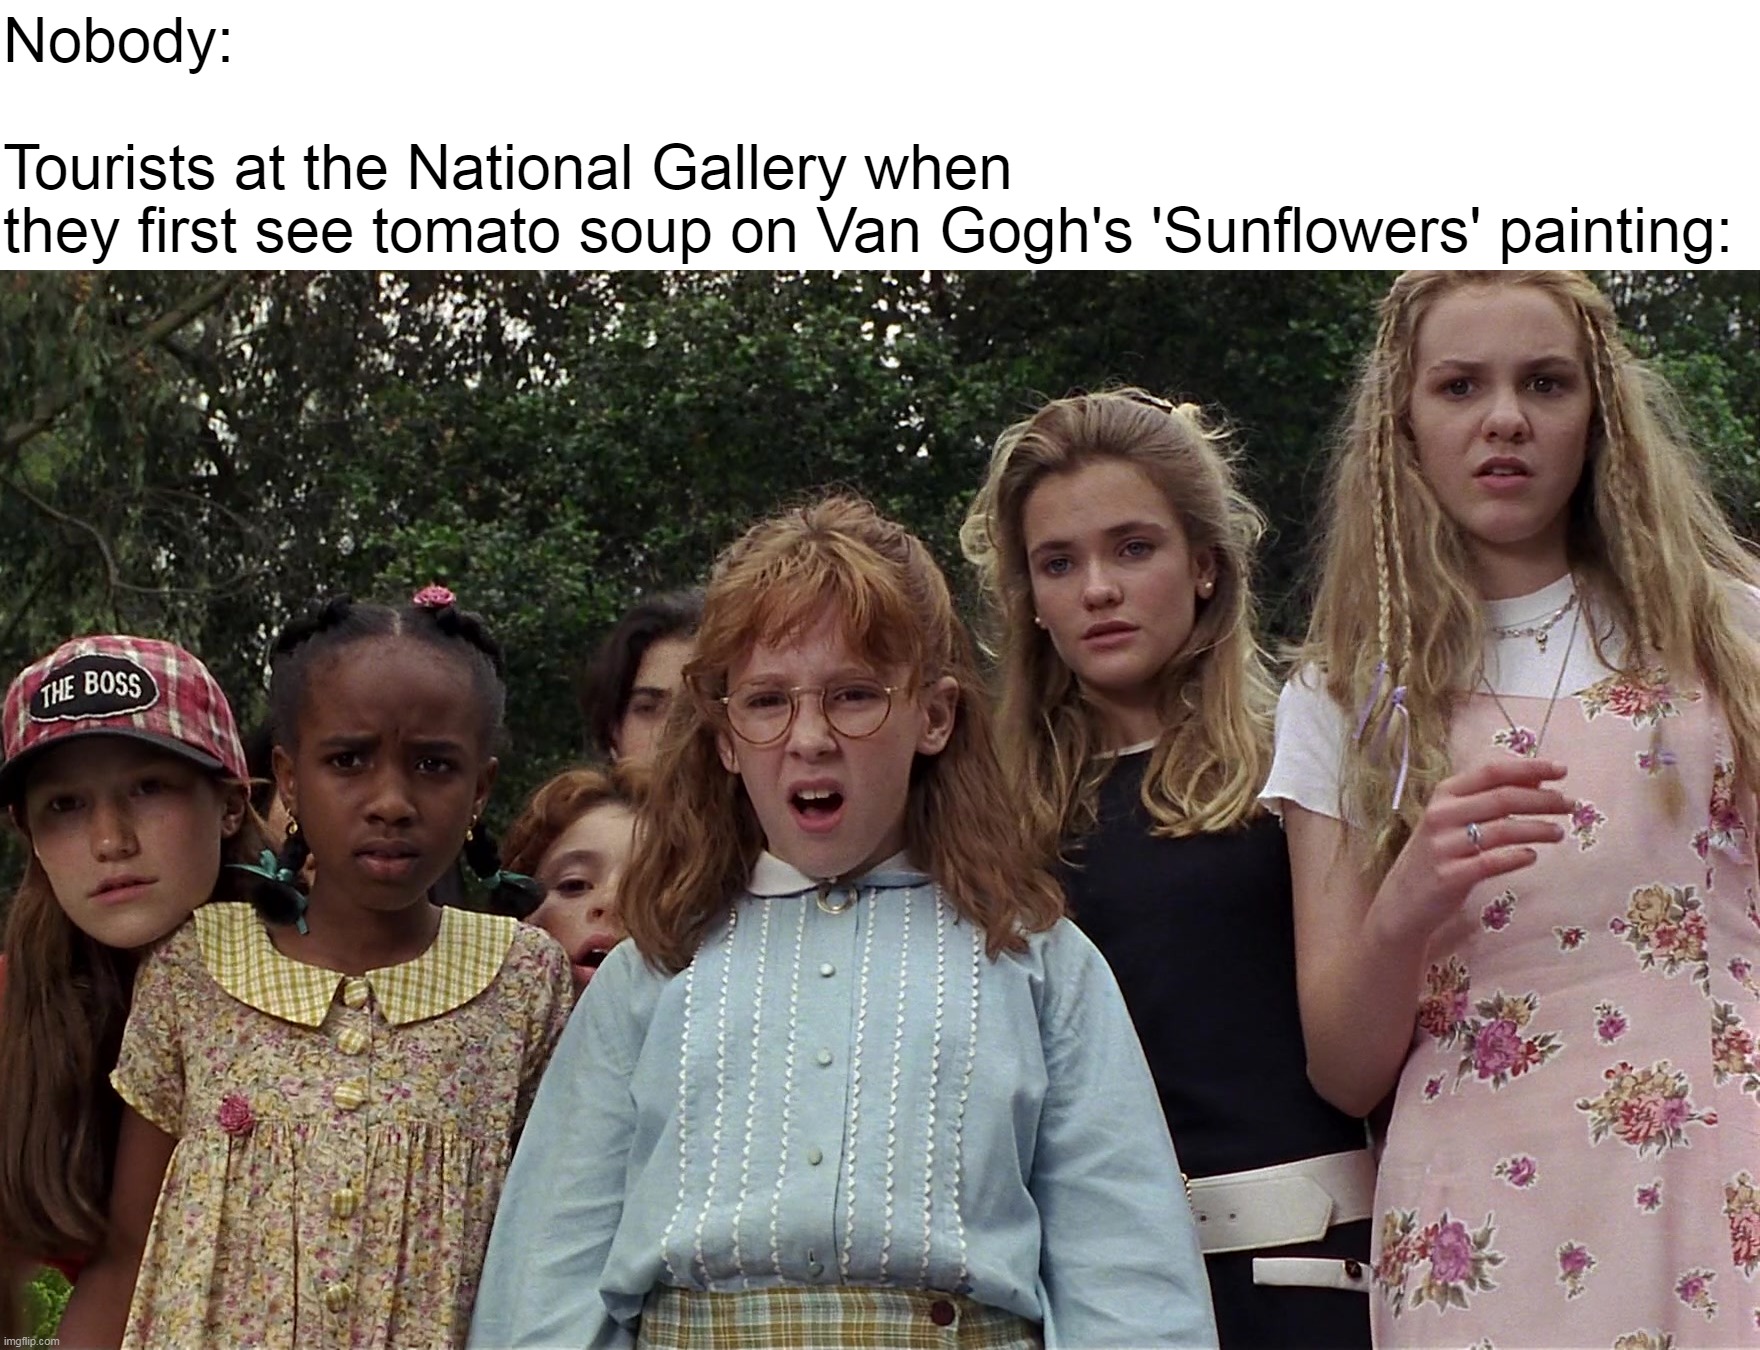 Nobody:
 
Tourists at the National Gallery when 
they first see tomato soup on Van Gogh's 'Sunflowers' painting: | image tagged in meme,memes,humor,funny,van gogh,london | made w/ Imgflip meme maker